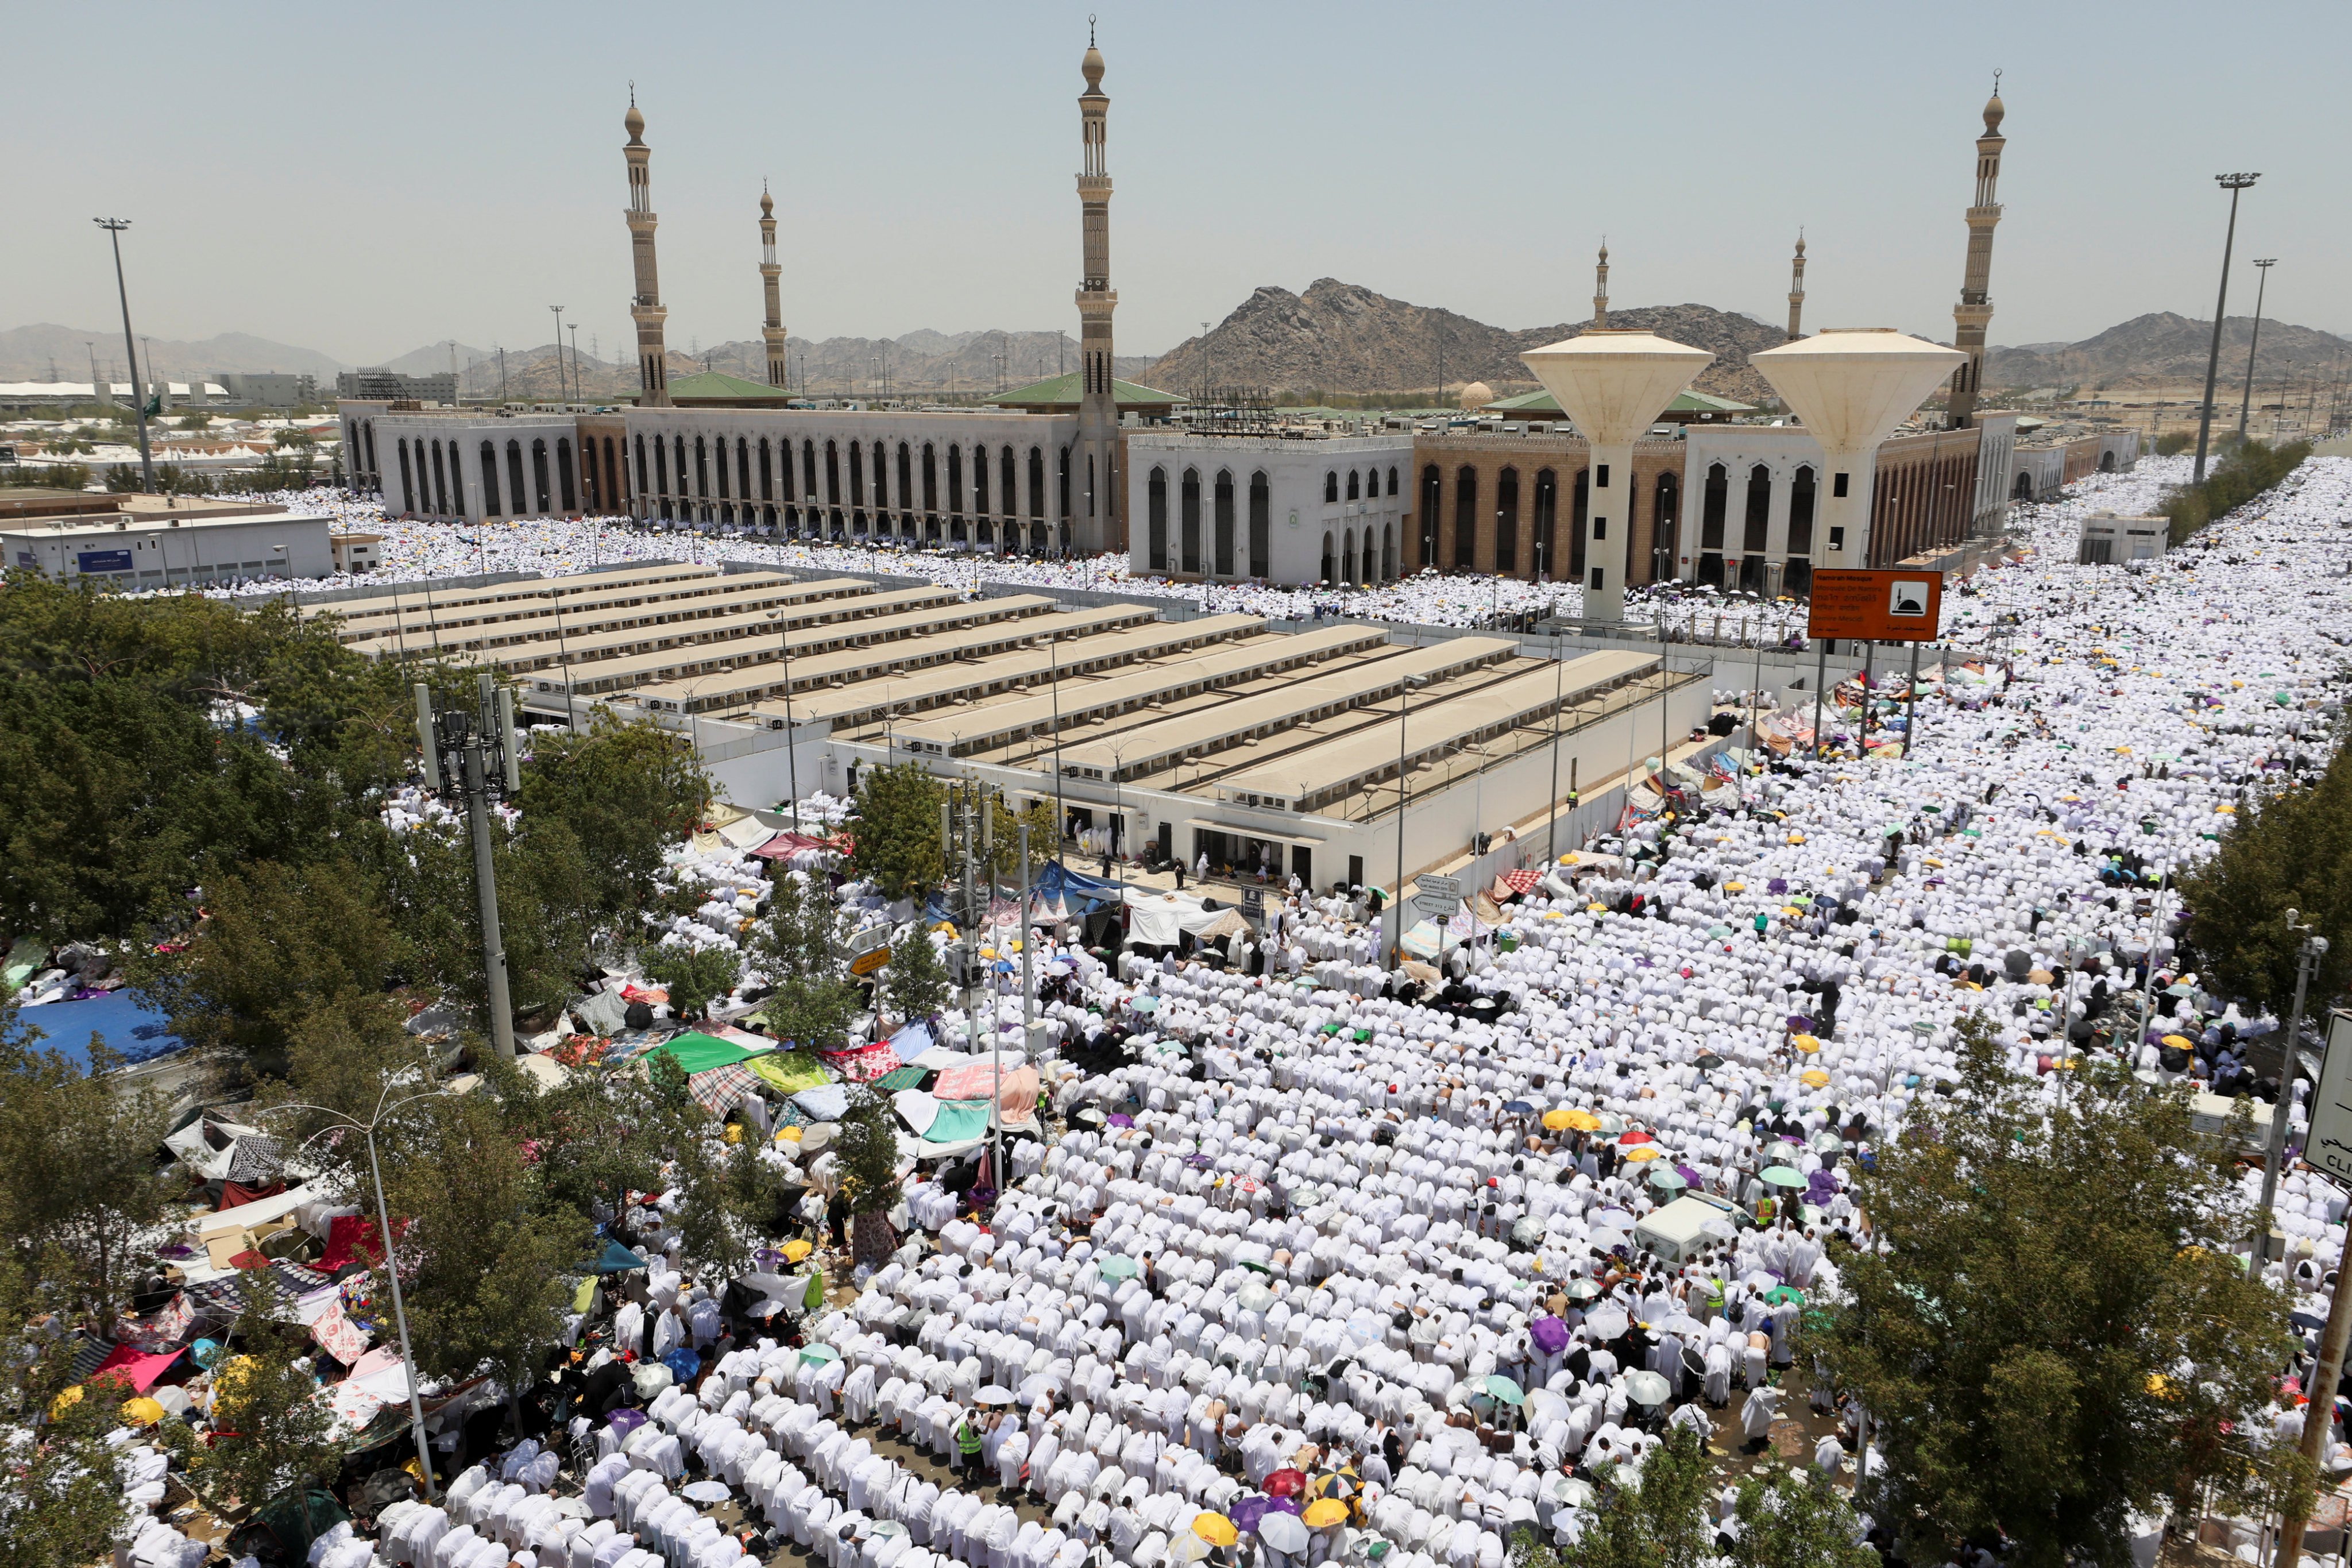 Muslim pilgrims pray at Namira Mosque on the plain of Arafat during the annual haj pilgrimage, outside the holy city of Mecca, Saudi Arabia on Tuesday. Photo: Reuters